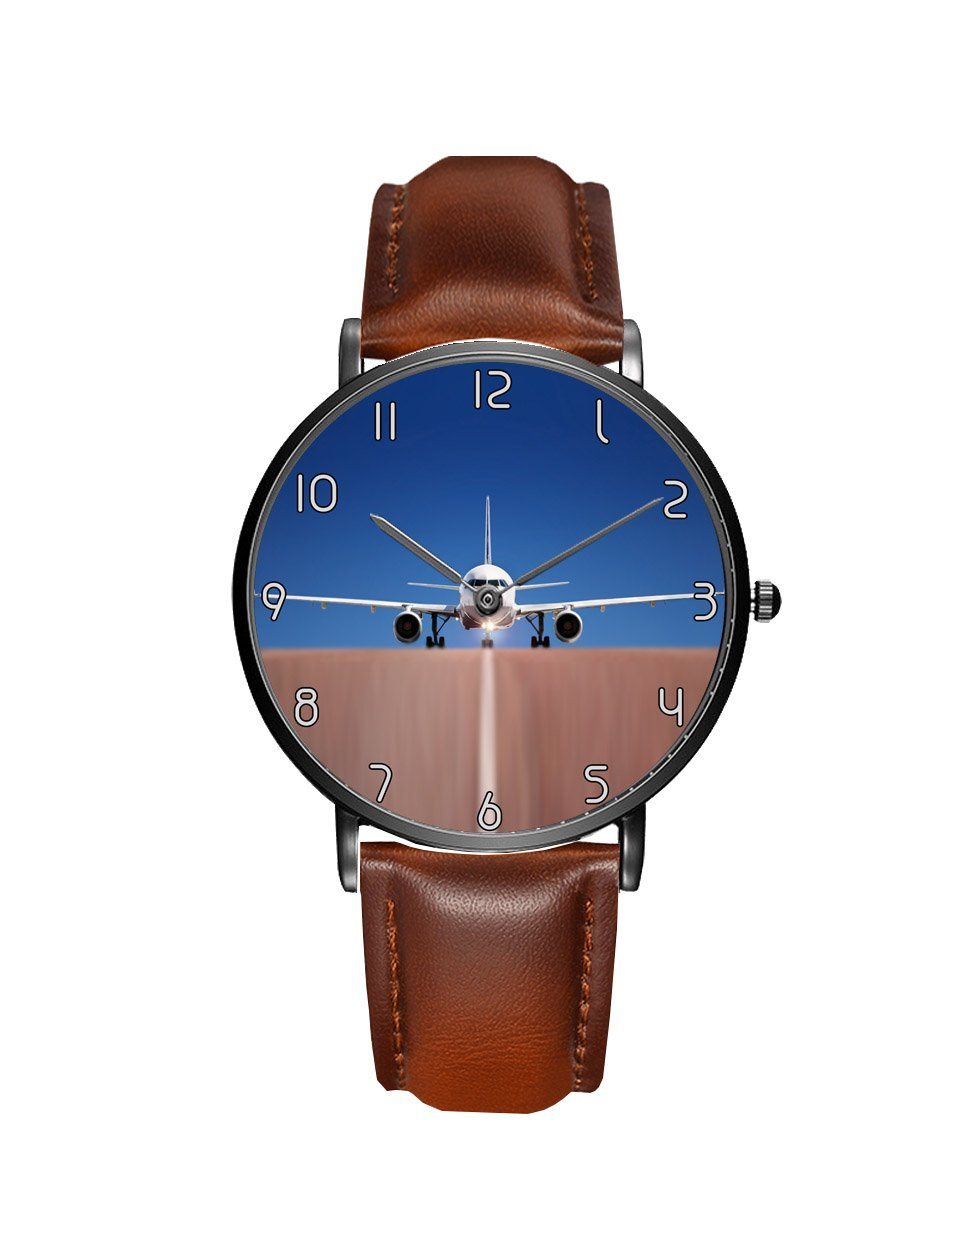 Face to Face with an Airbus A320 Leather Strap Watches Aviation Shop Black & Brown Leather Strap 